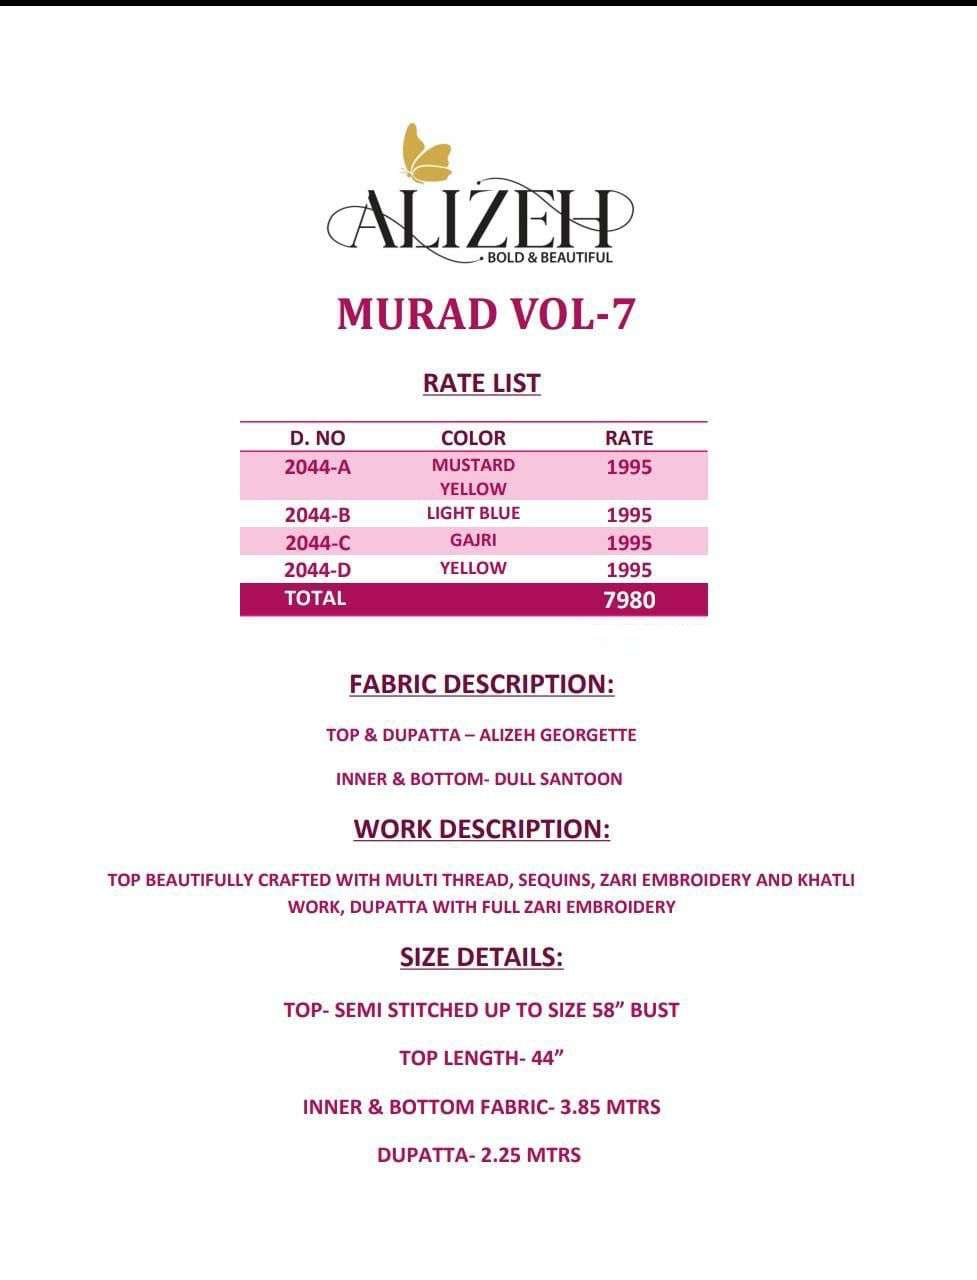 MURAD VOL-7 BY ALIZEH 2044-A TO 2044-D SERIES BEAUTIFUL SUITS COLORFUL STYLISH FANCY CASUAL WEAR & ETHNIC WEAR PURE GEORGETTE EMBROIDERED DRESSES AT WHOLESALE PRICE